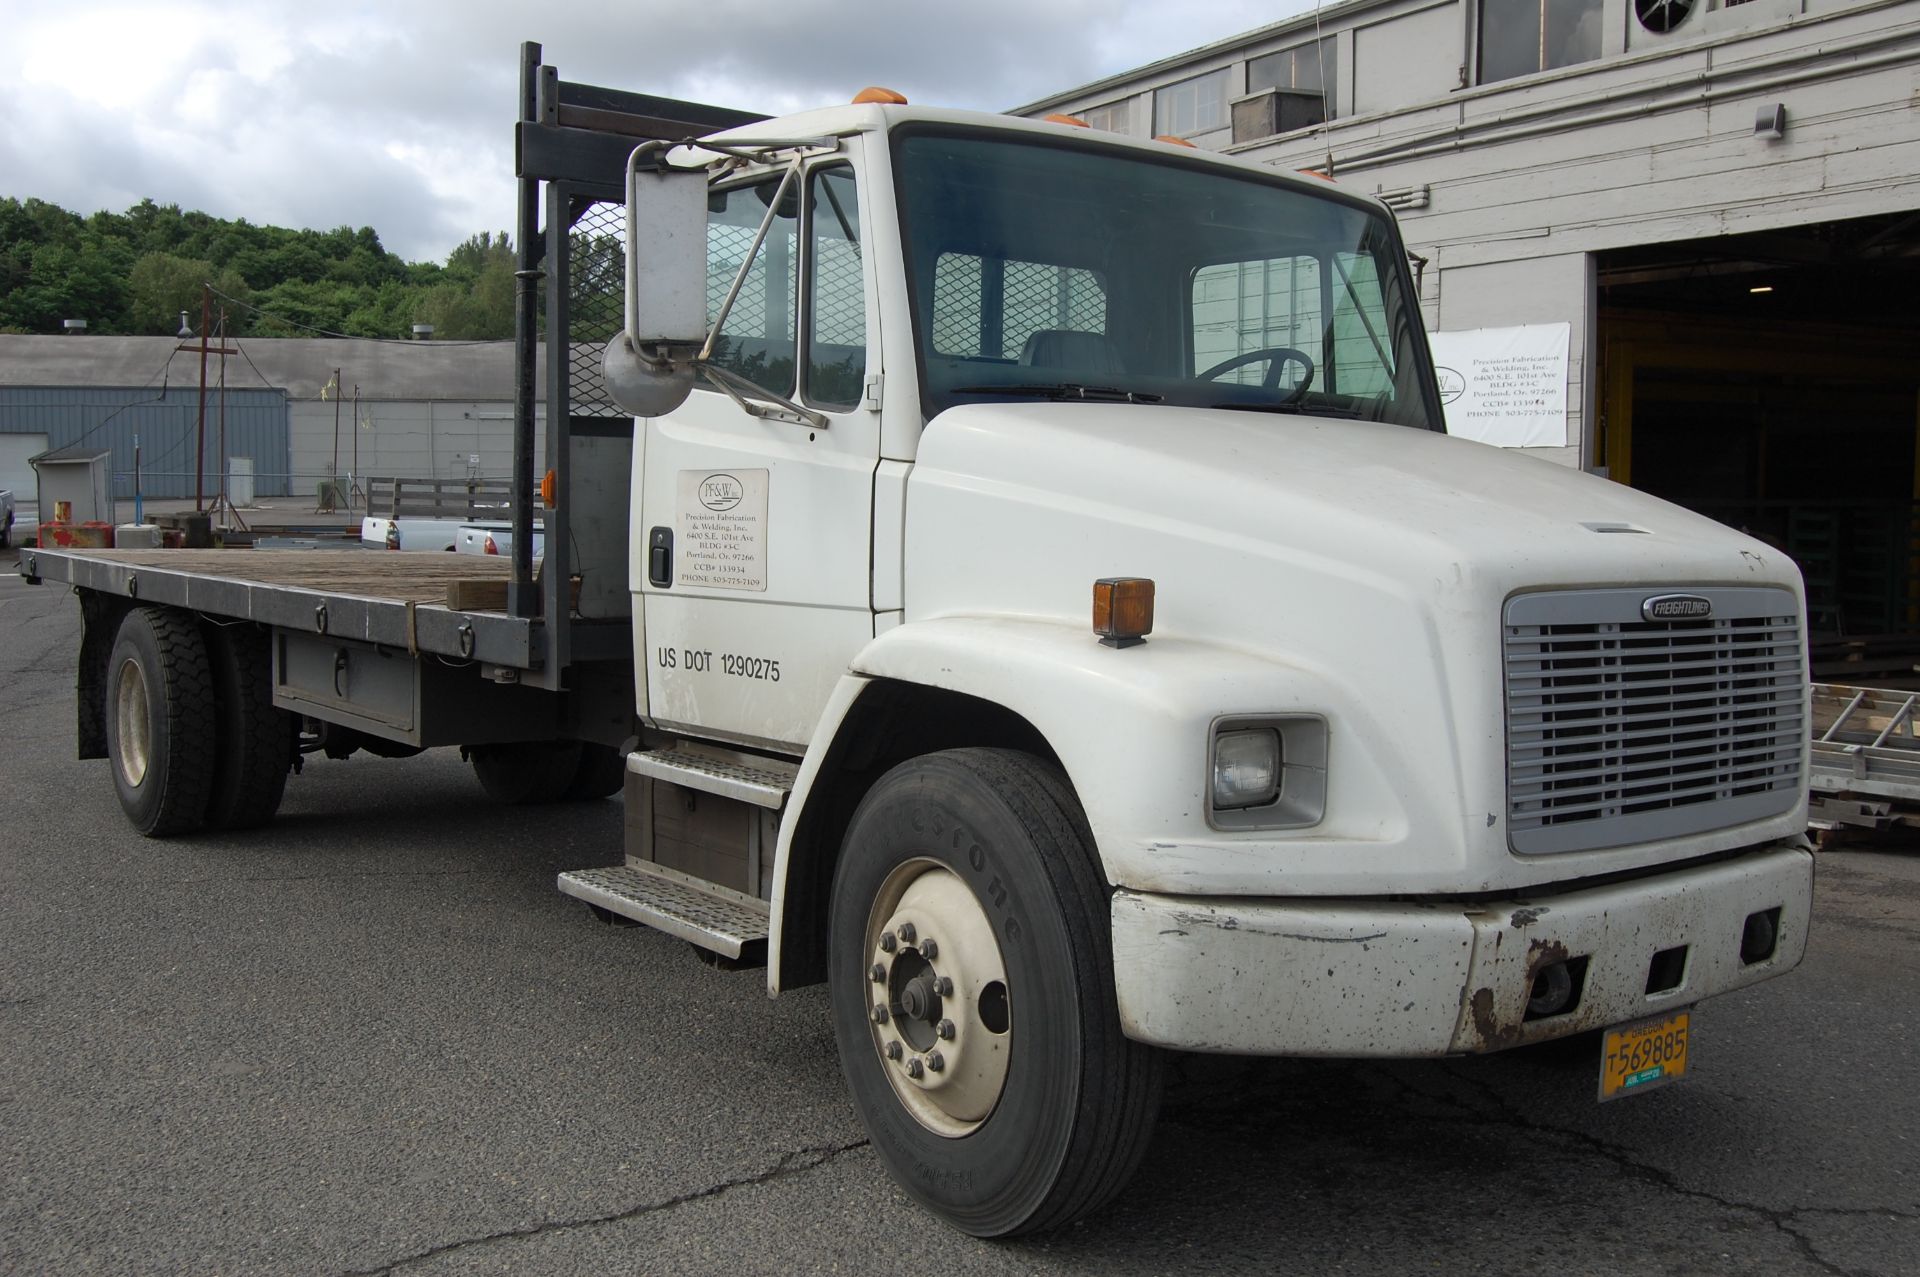 1996 Freightliner F70 20' Tandem axle Flatbed Truck 6 speed manual transmission - Image 6 of 8